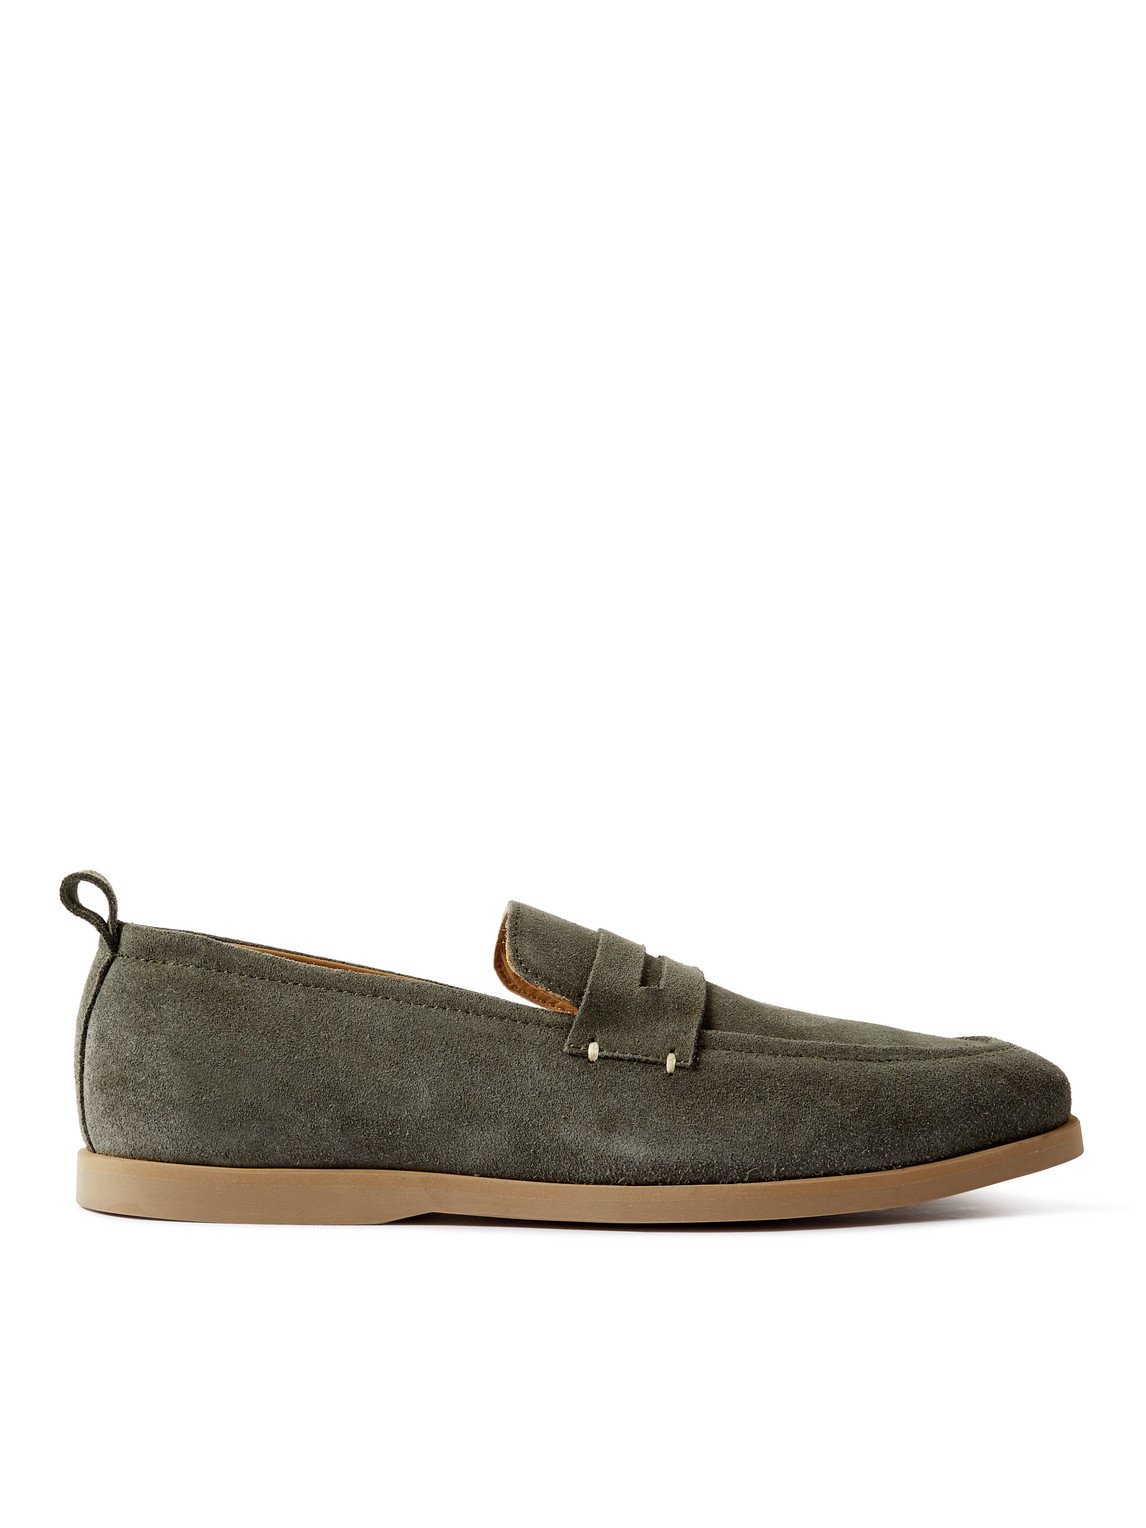 Mr P. - Regenerated Suede by evolo® Penny Loafers - Men - Green - UK 11 von Mr P.